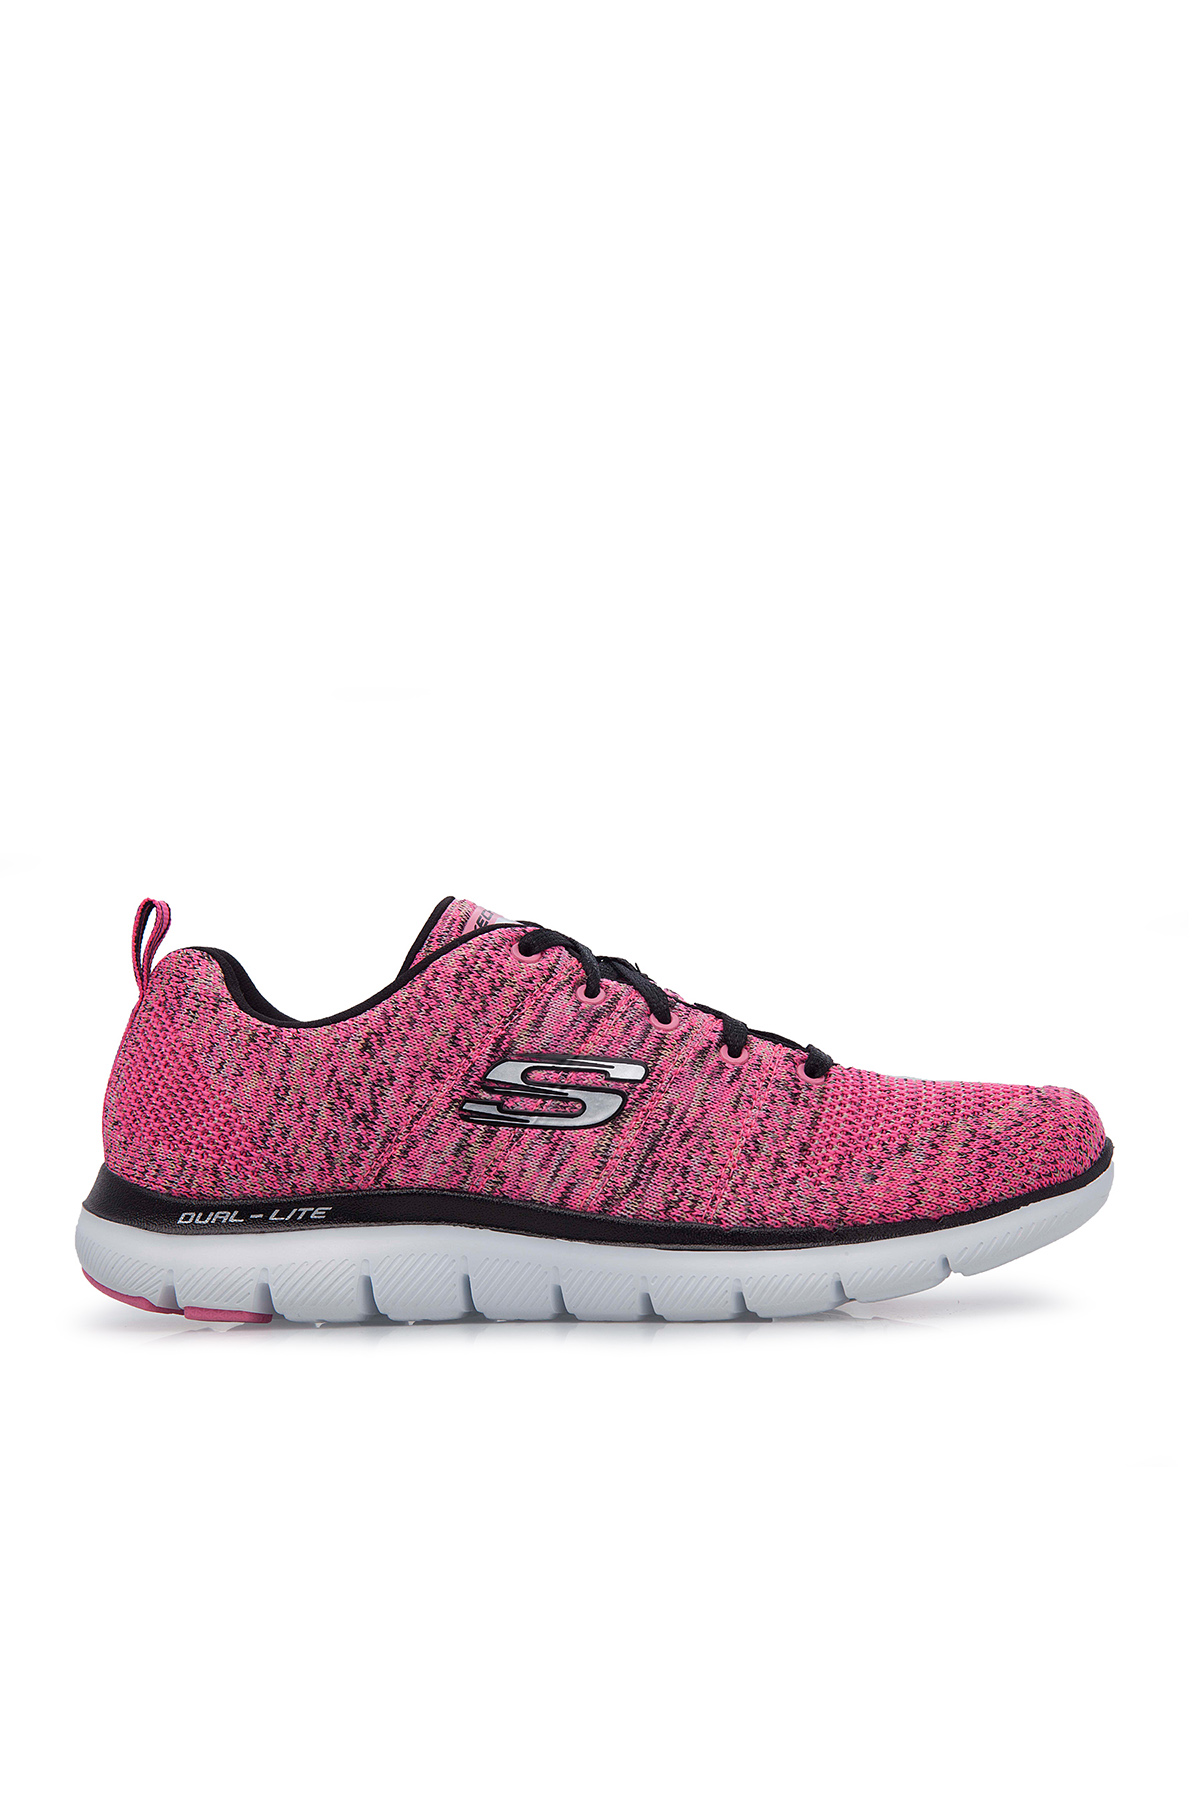 official store skechers